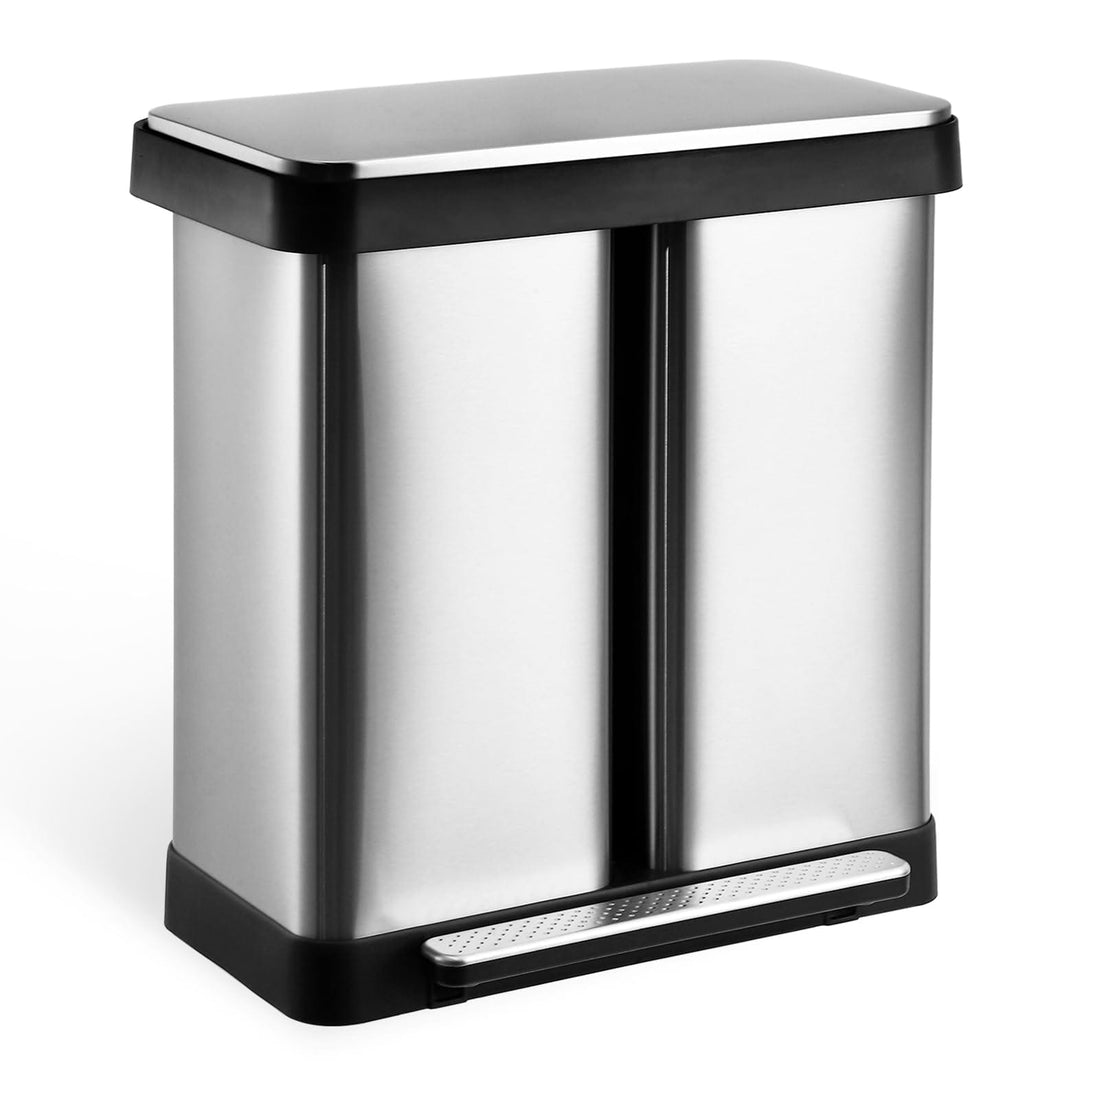 2x30L Stainless Steel Trash Can with Pedal, Lid & Inner Buckets